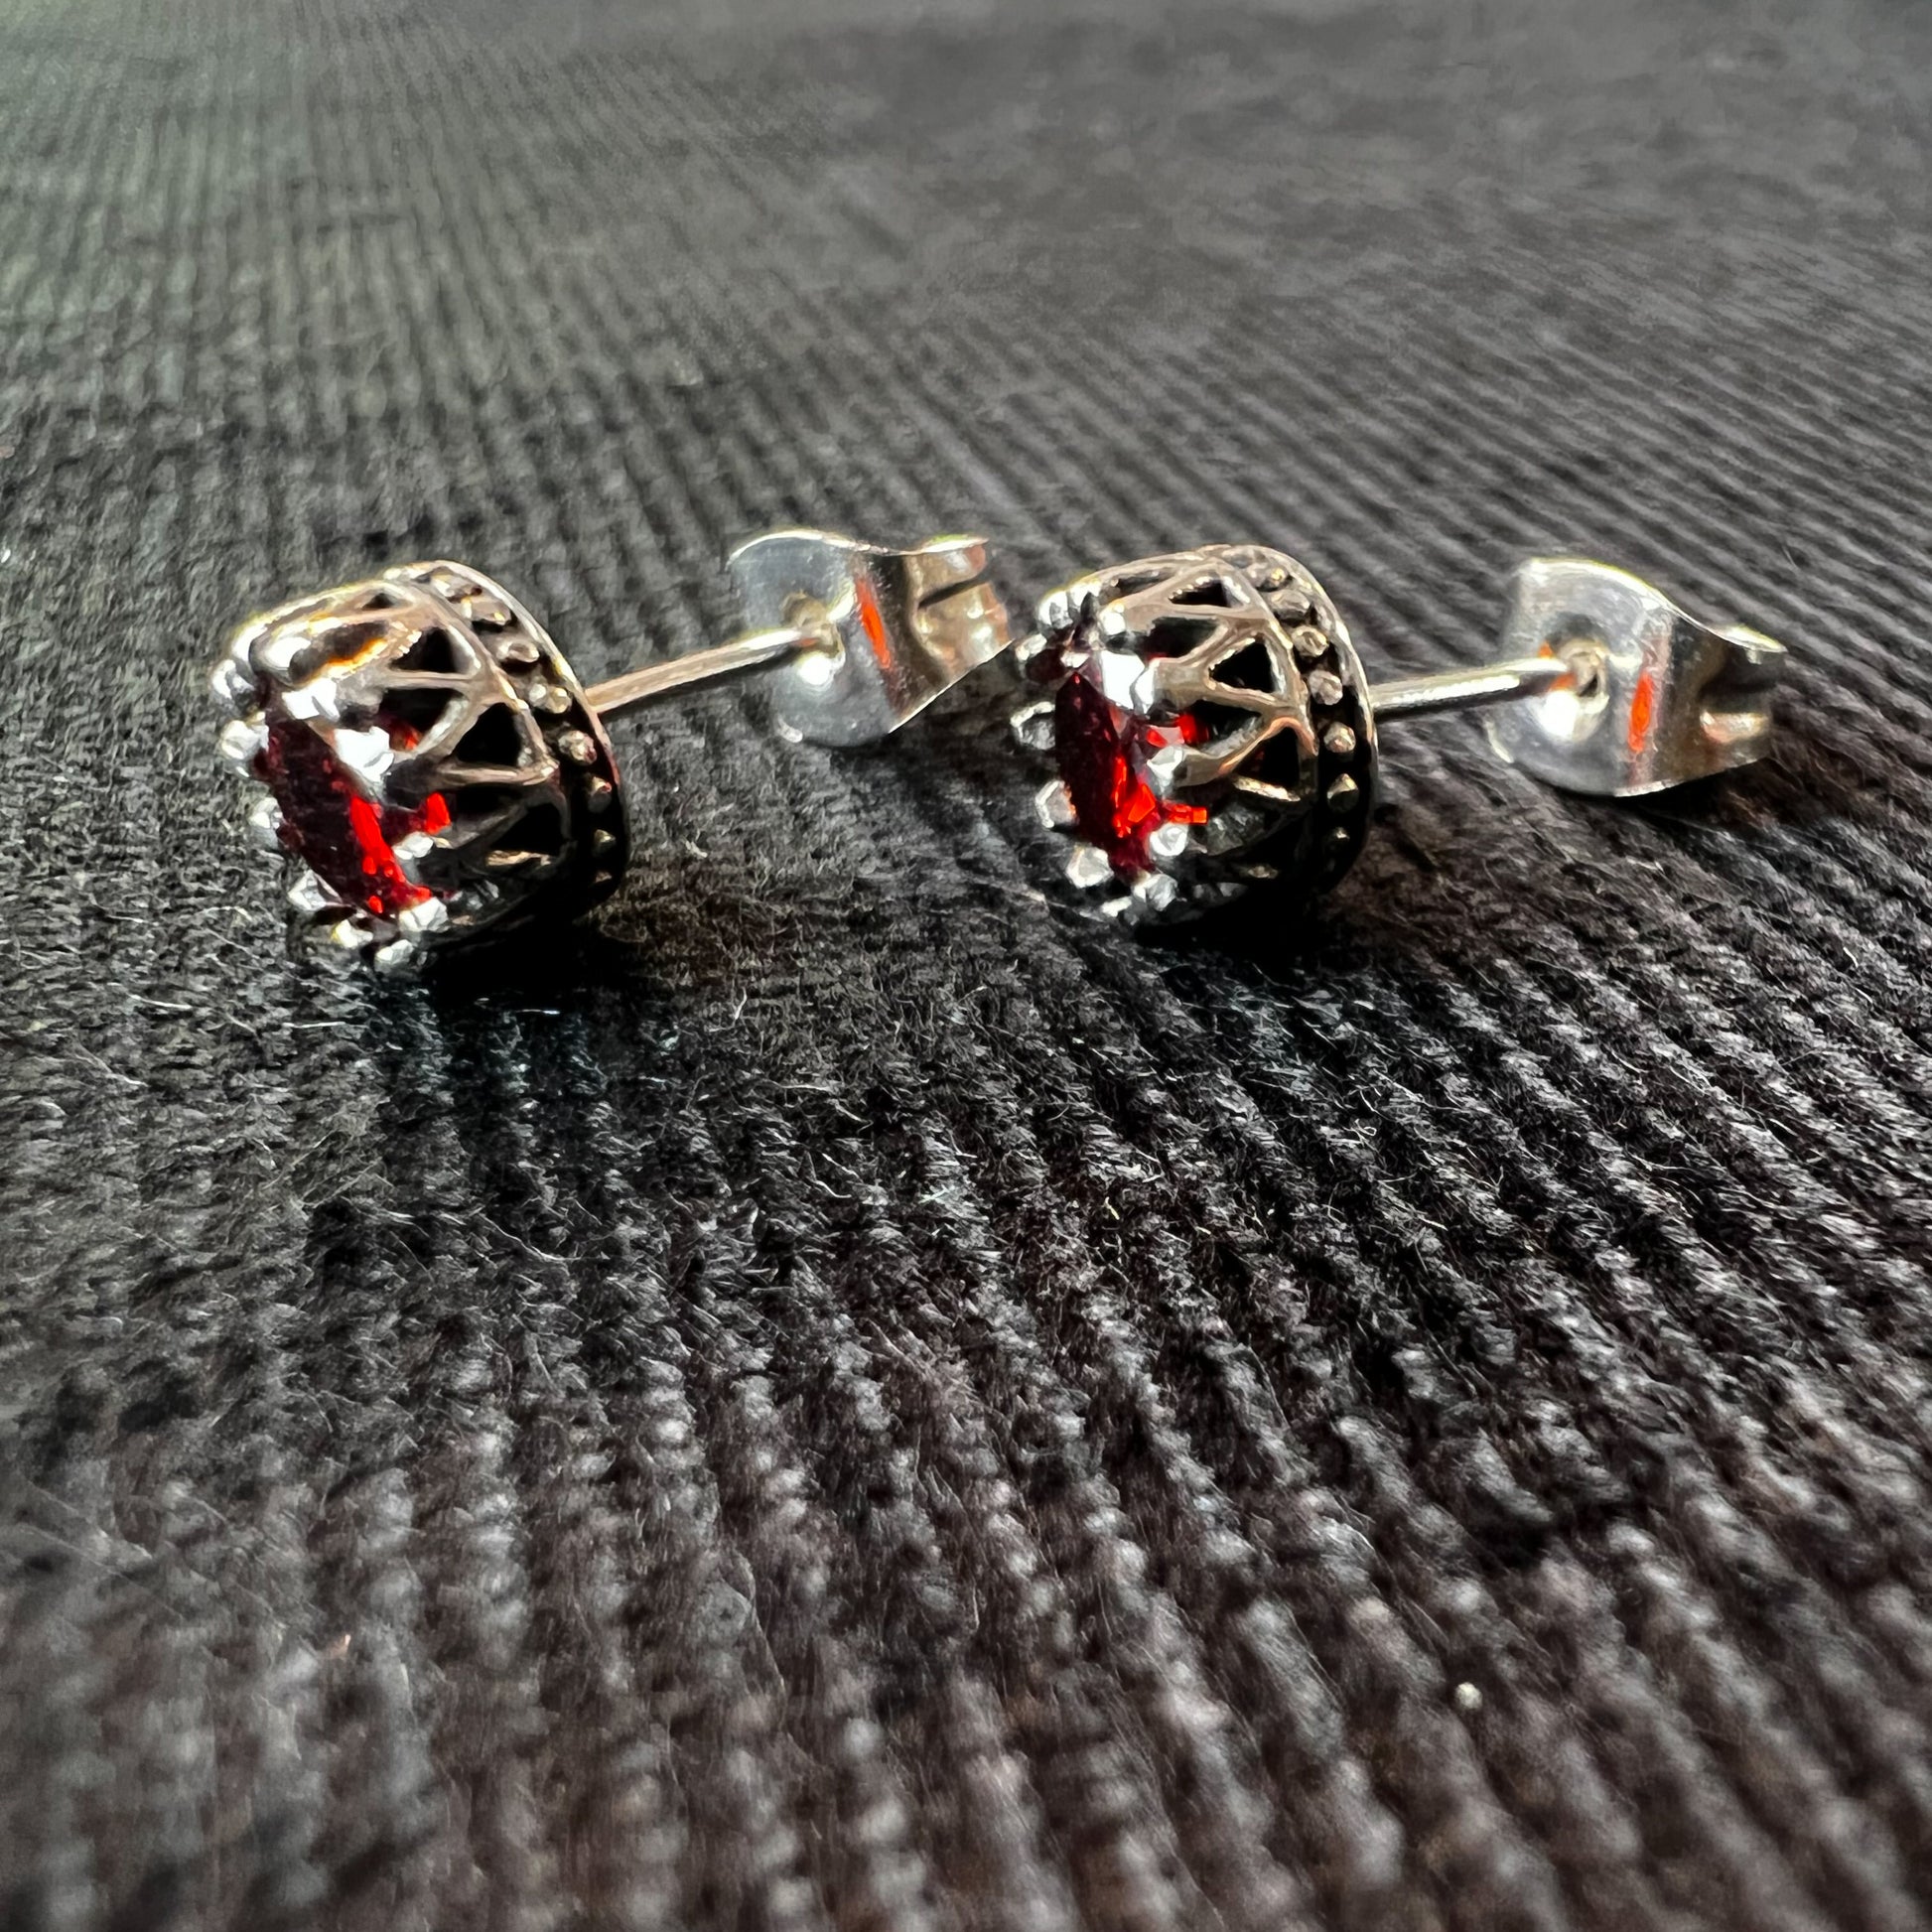 Red rhinestone and crown earrings royalcore retro jewelry elegant stud push-back earrings gift for her